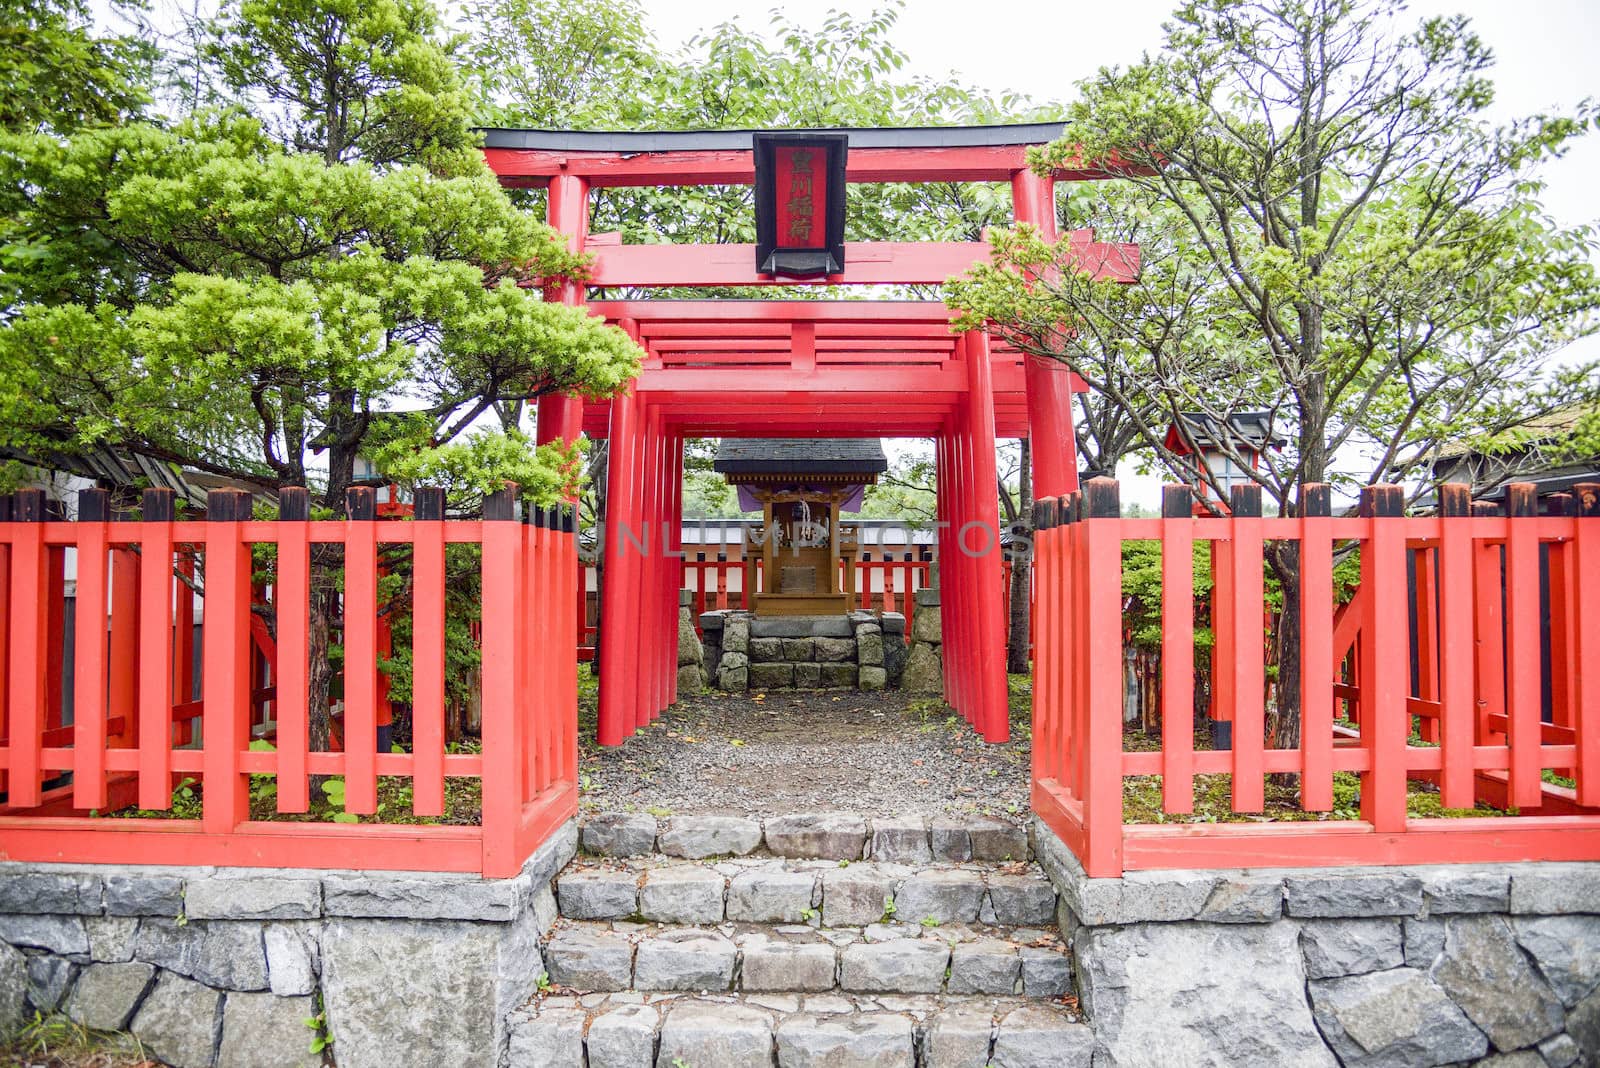 Small shrine with red Torii in Japanese style1 by gjeerawut